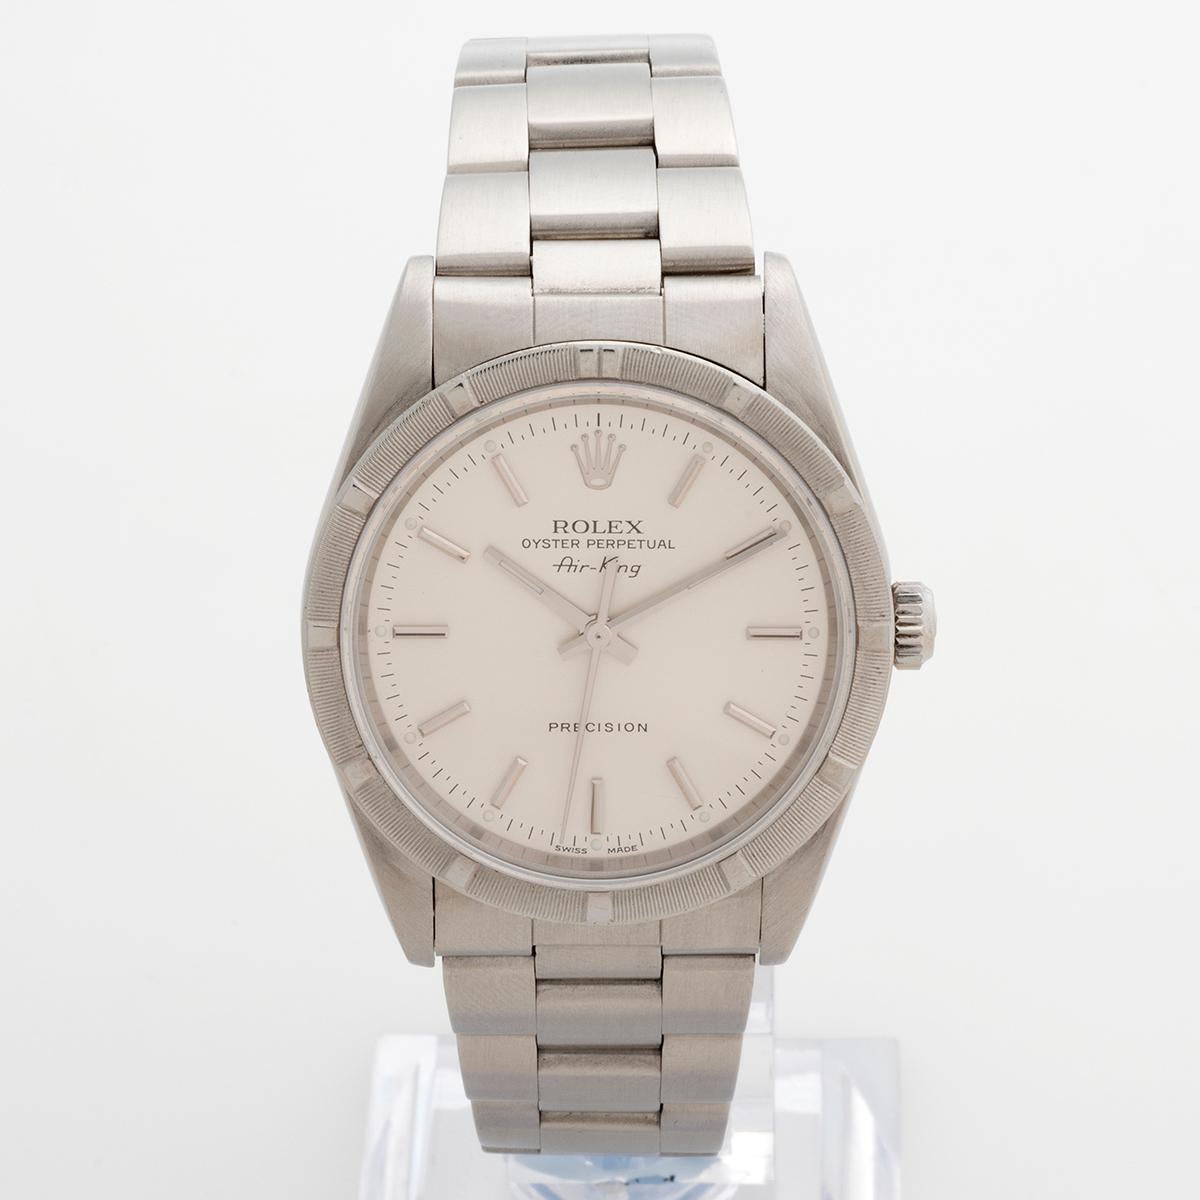 Our classic neo vintage Rolex Air-King reference 140101M features a stainless steel 34mm case with engine turned bezel and Oyster bracelet, and silver dial. Presented in excellent condition for its age, this Air-King has light signs of use overall,